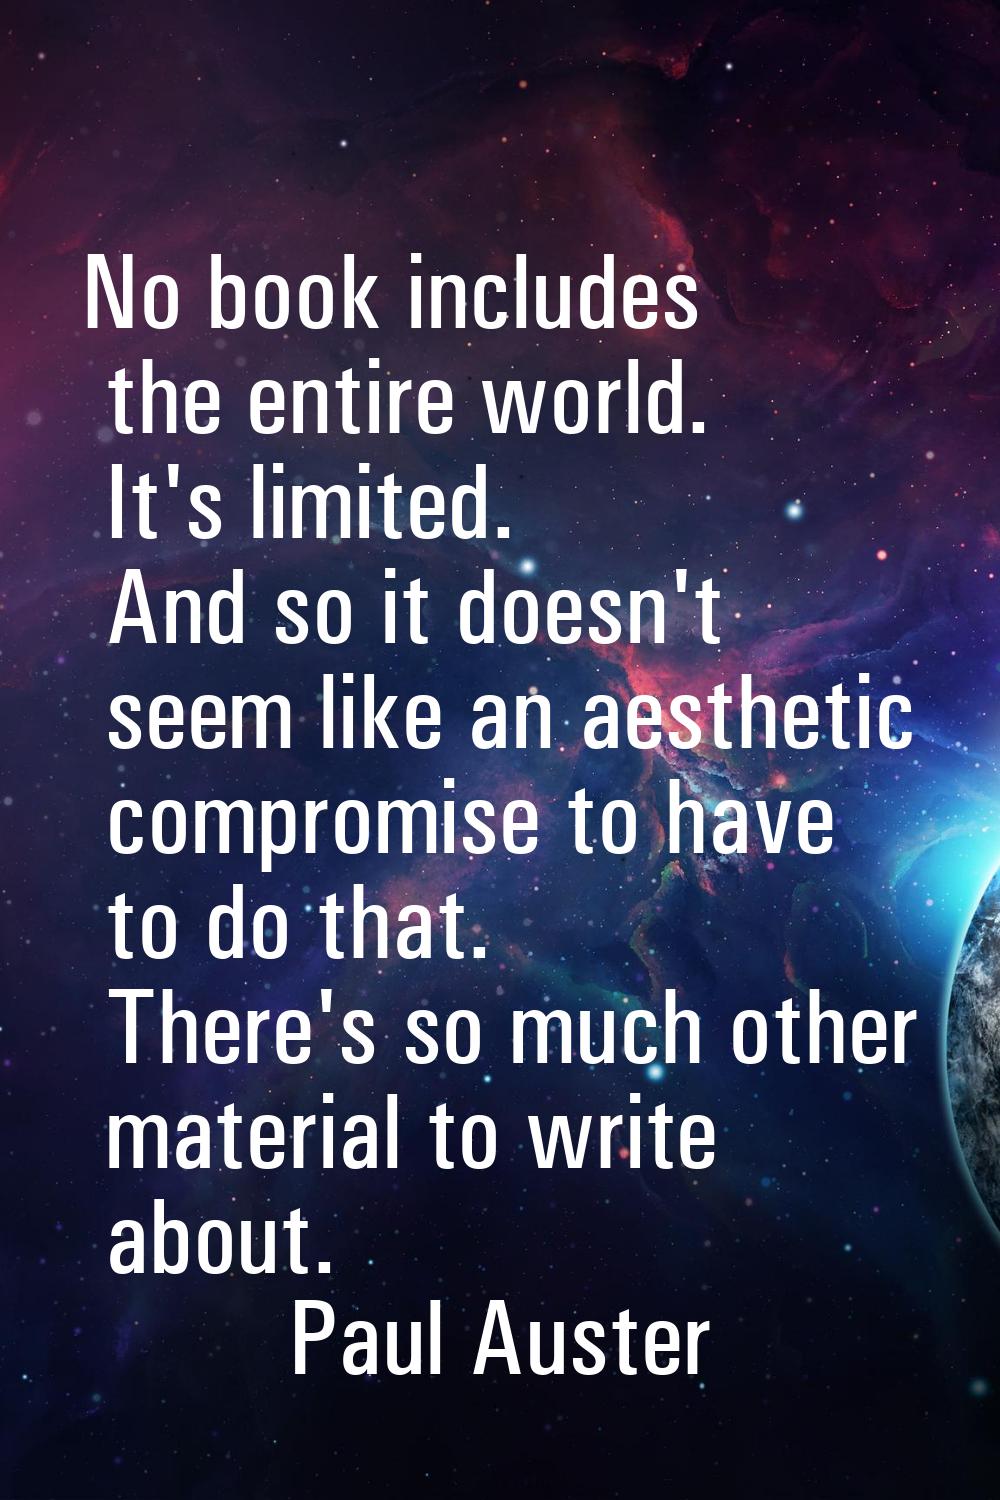 No book includes the entire world. It's limited. And so it doesn't seem like an aesthetic compromis